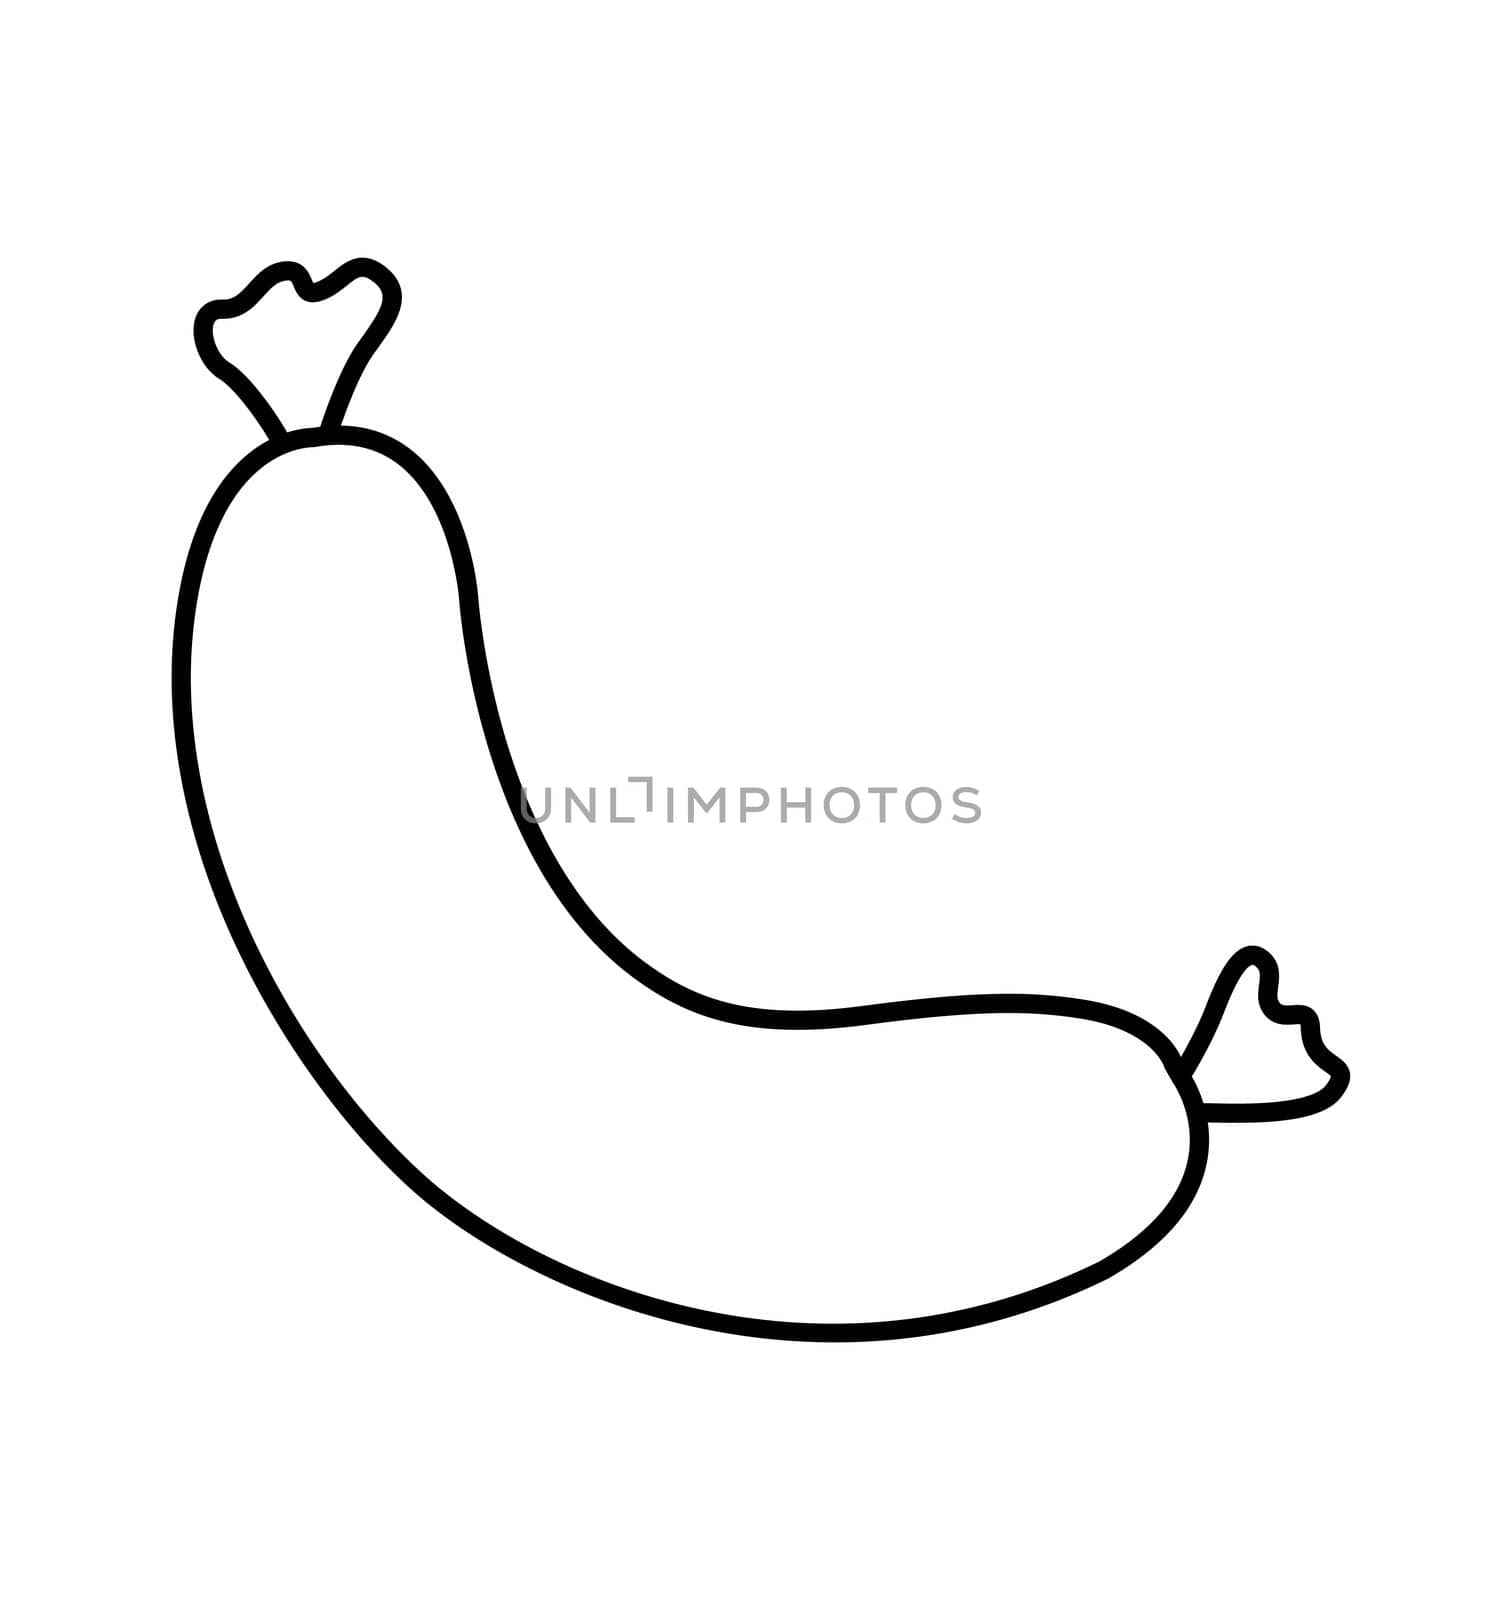 Sausage line icon vector isolated